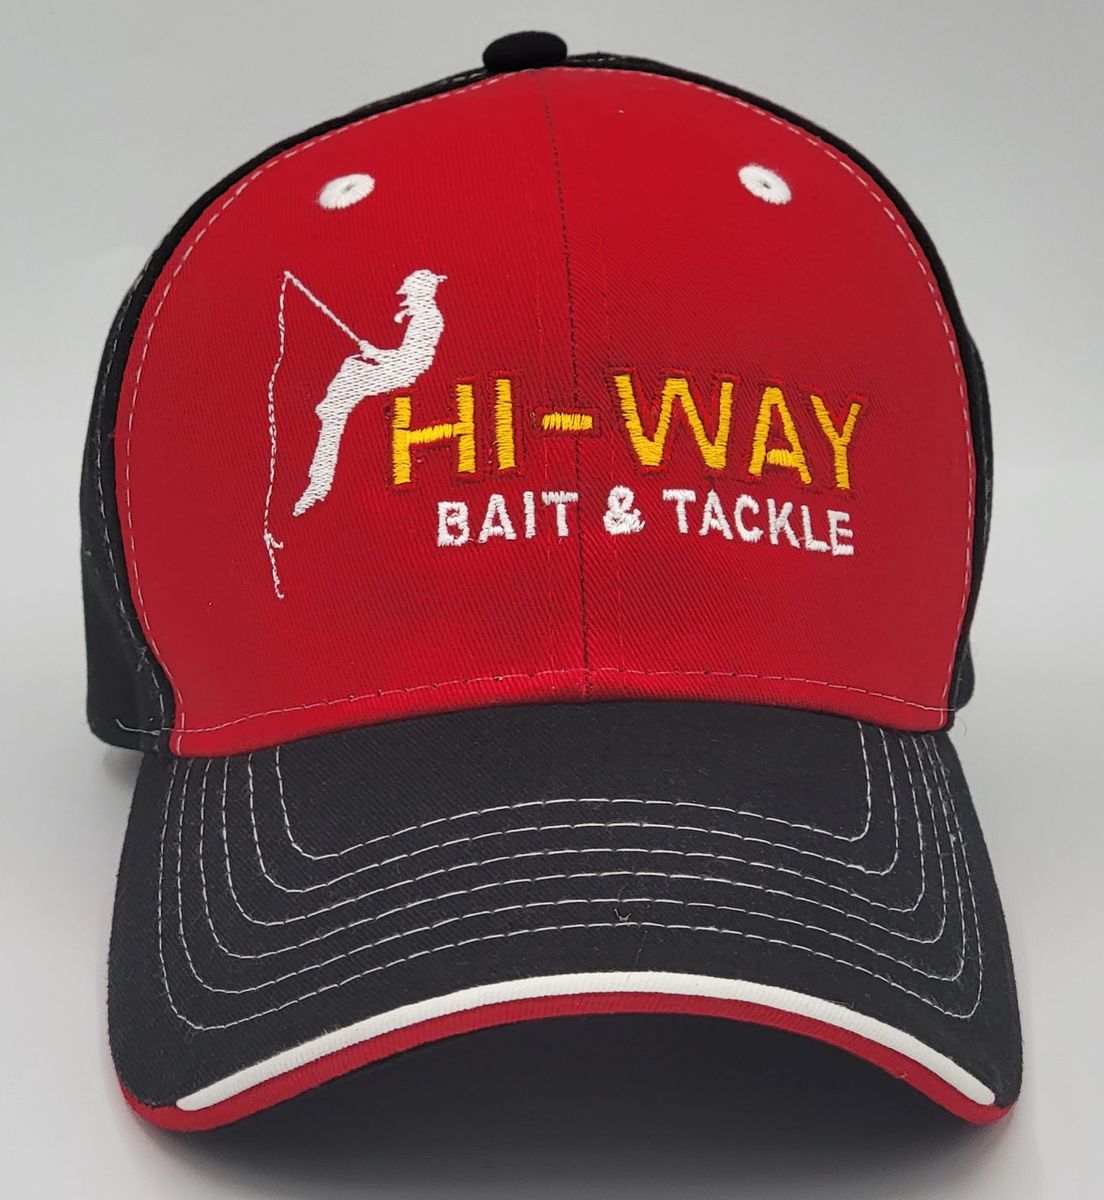 HI-WAY BAIT & TACKLE Black and Red Hat